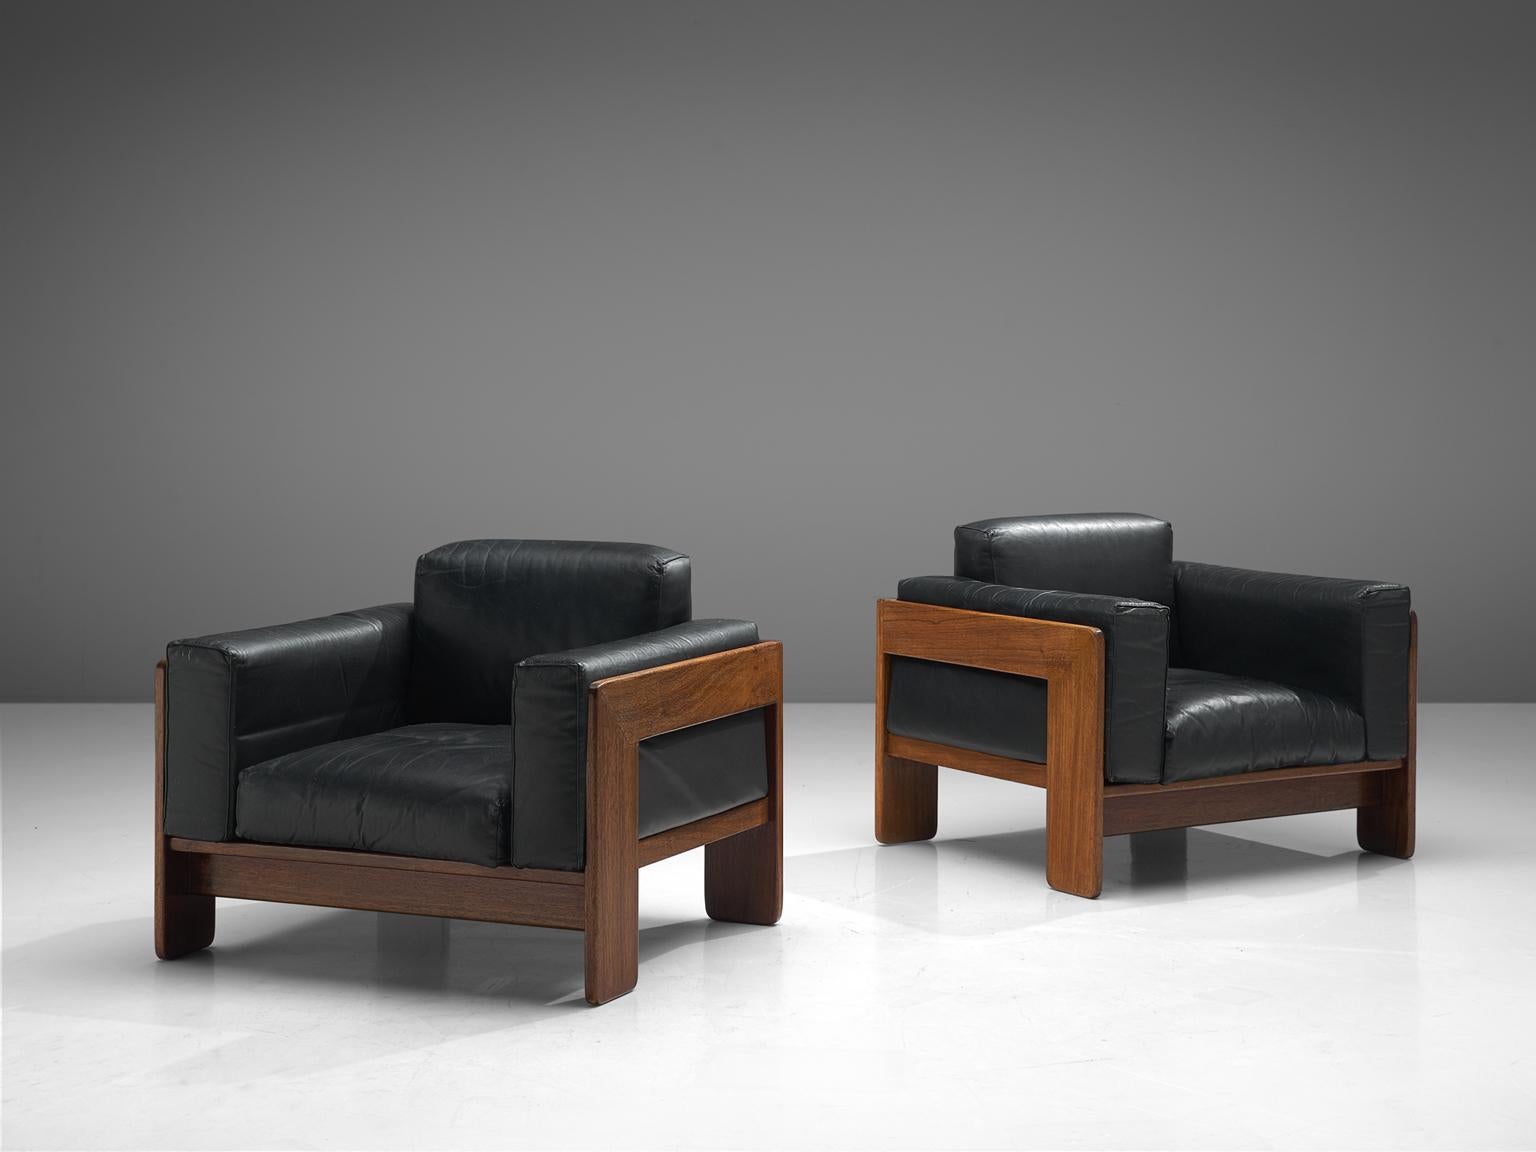 Tobia Scarpa for Knoll, set of 'Bastiano' lounge chairs, leather and walnut, Italy, design 1960, manufactured in the 1970s.

Beautiful Bastiano lounge chairs made with a walnut frame and black leather cushions. Tobia Scarpa designed the Bastiano